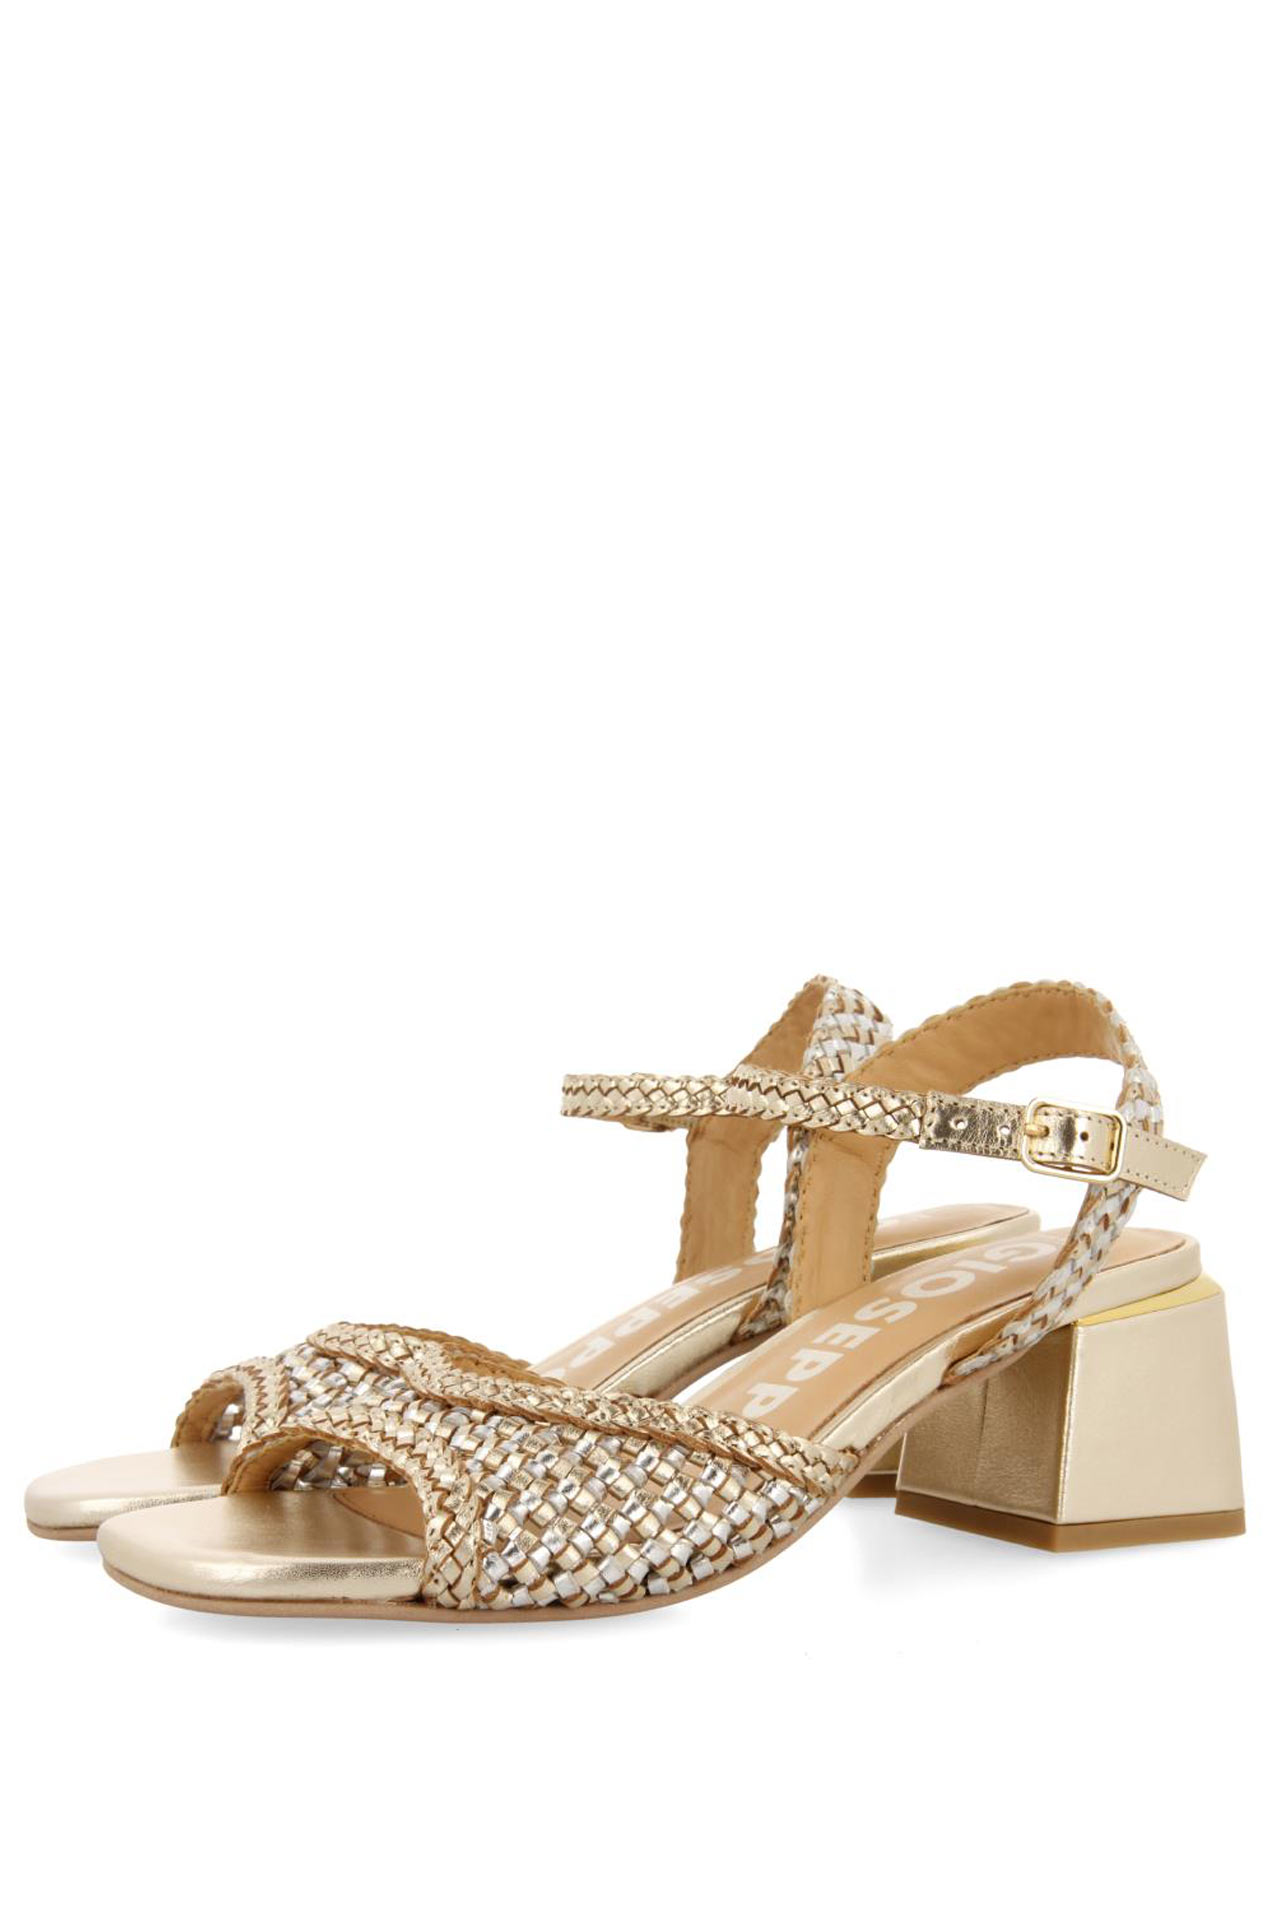 GIOSEPPO LADOCK HEEL SANDALS WITH TWO-TONE BRAIDED VAMP